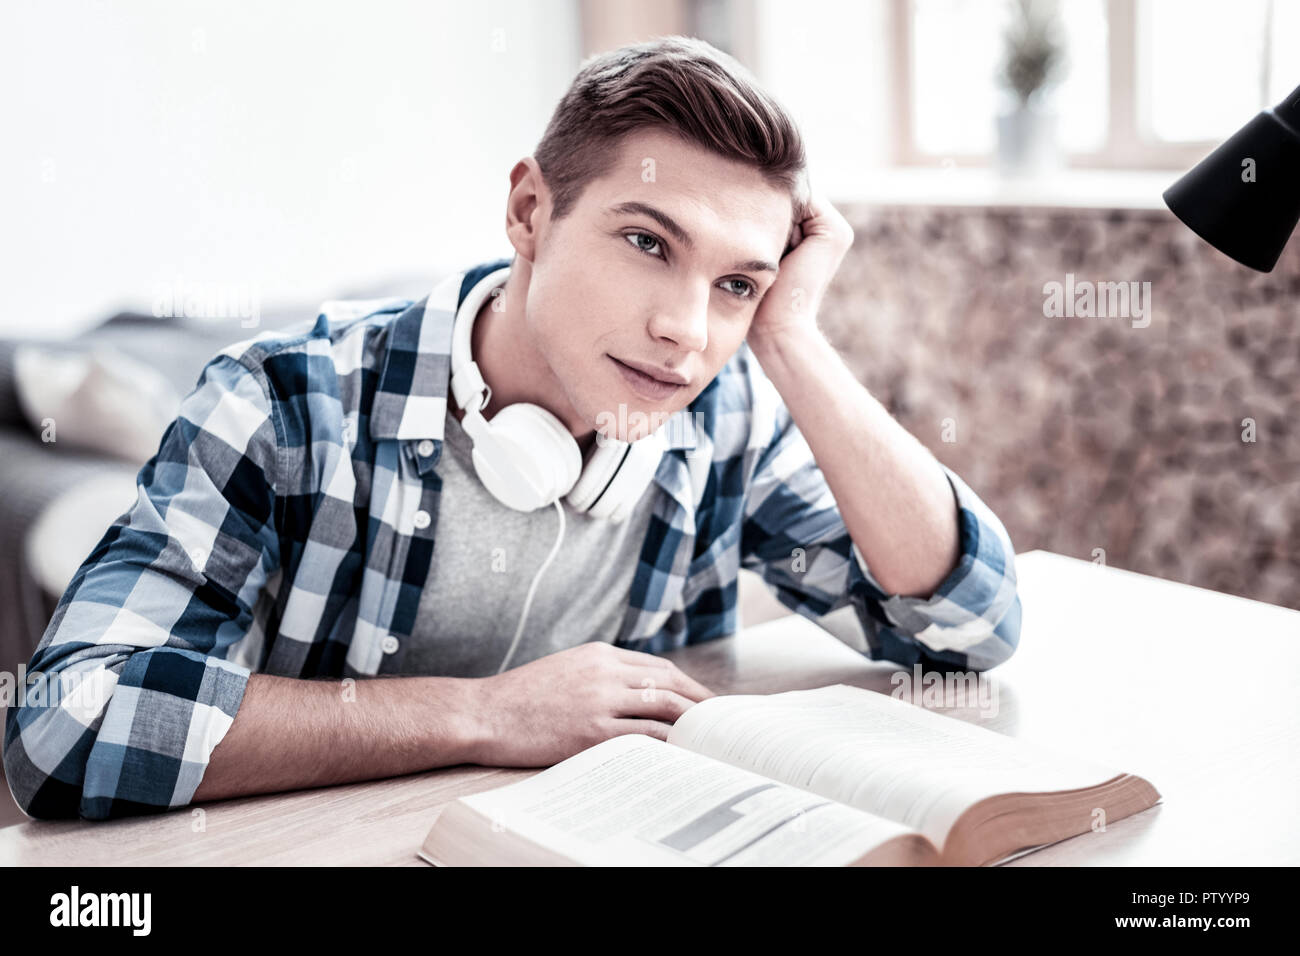 Dreamy student looking tired and thoughtfully smiling Stock Photo